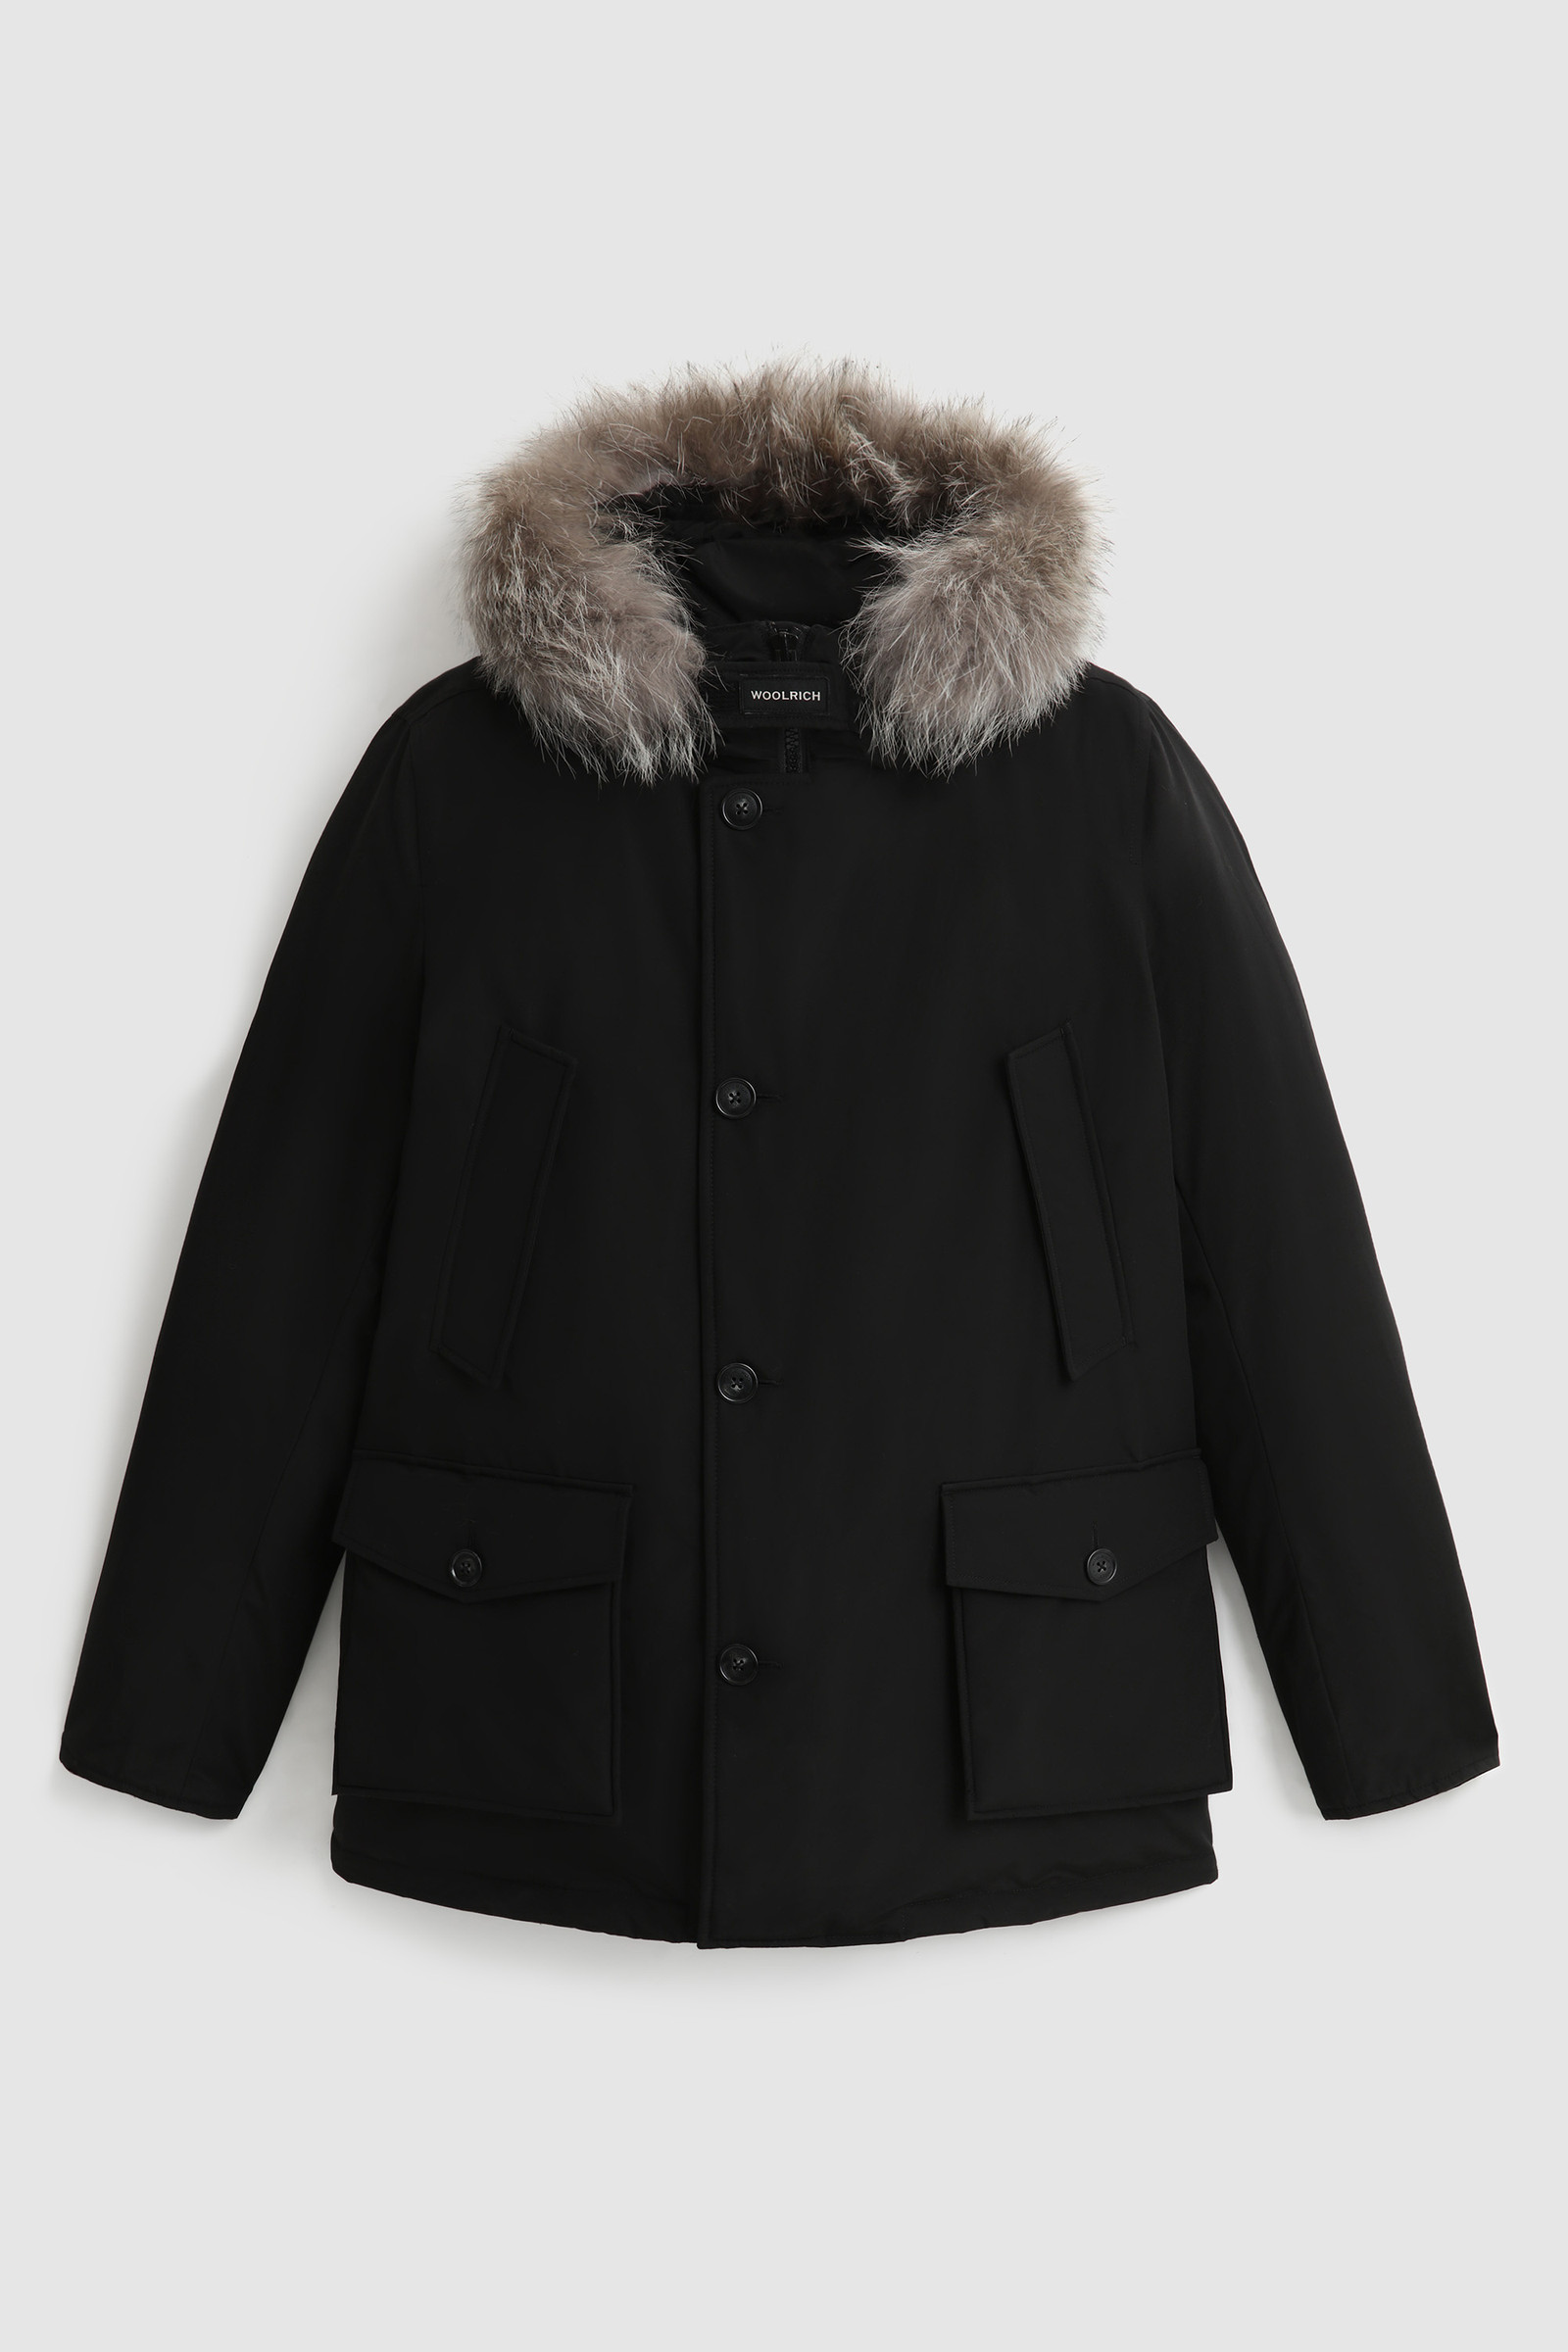 Men's Arctic Parka with Dyed Fur Black | Woolrich USA